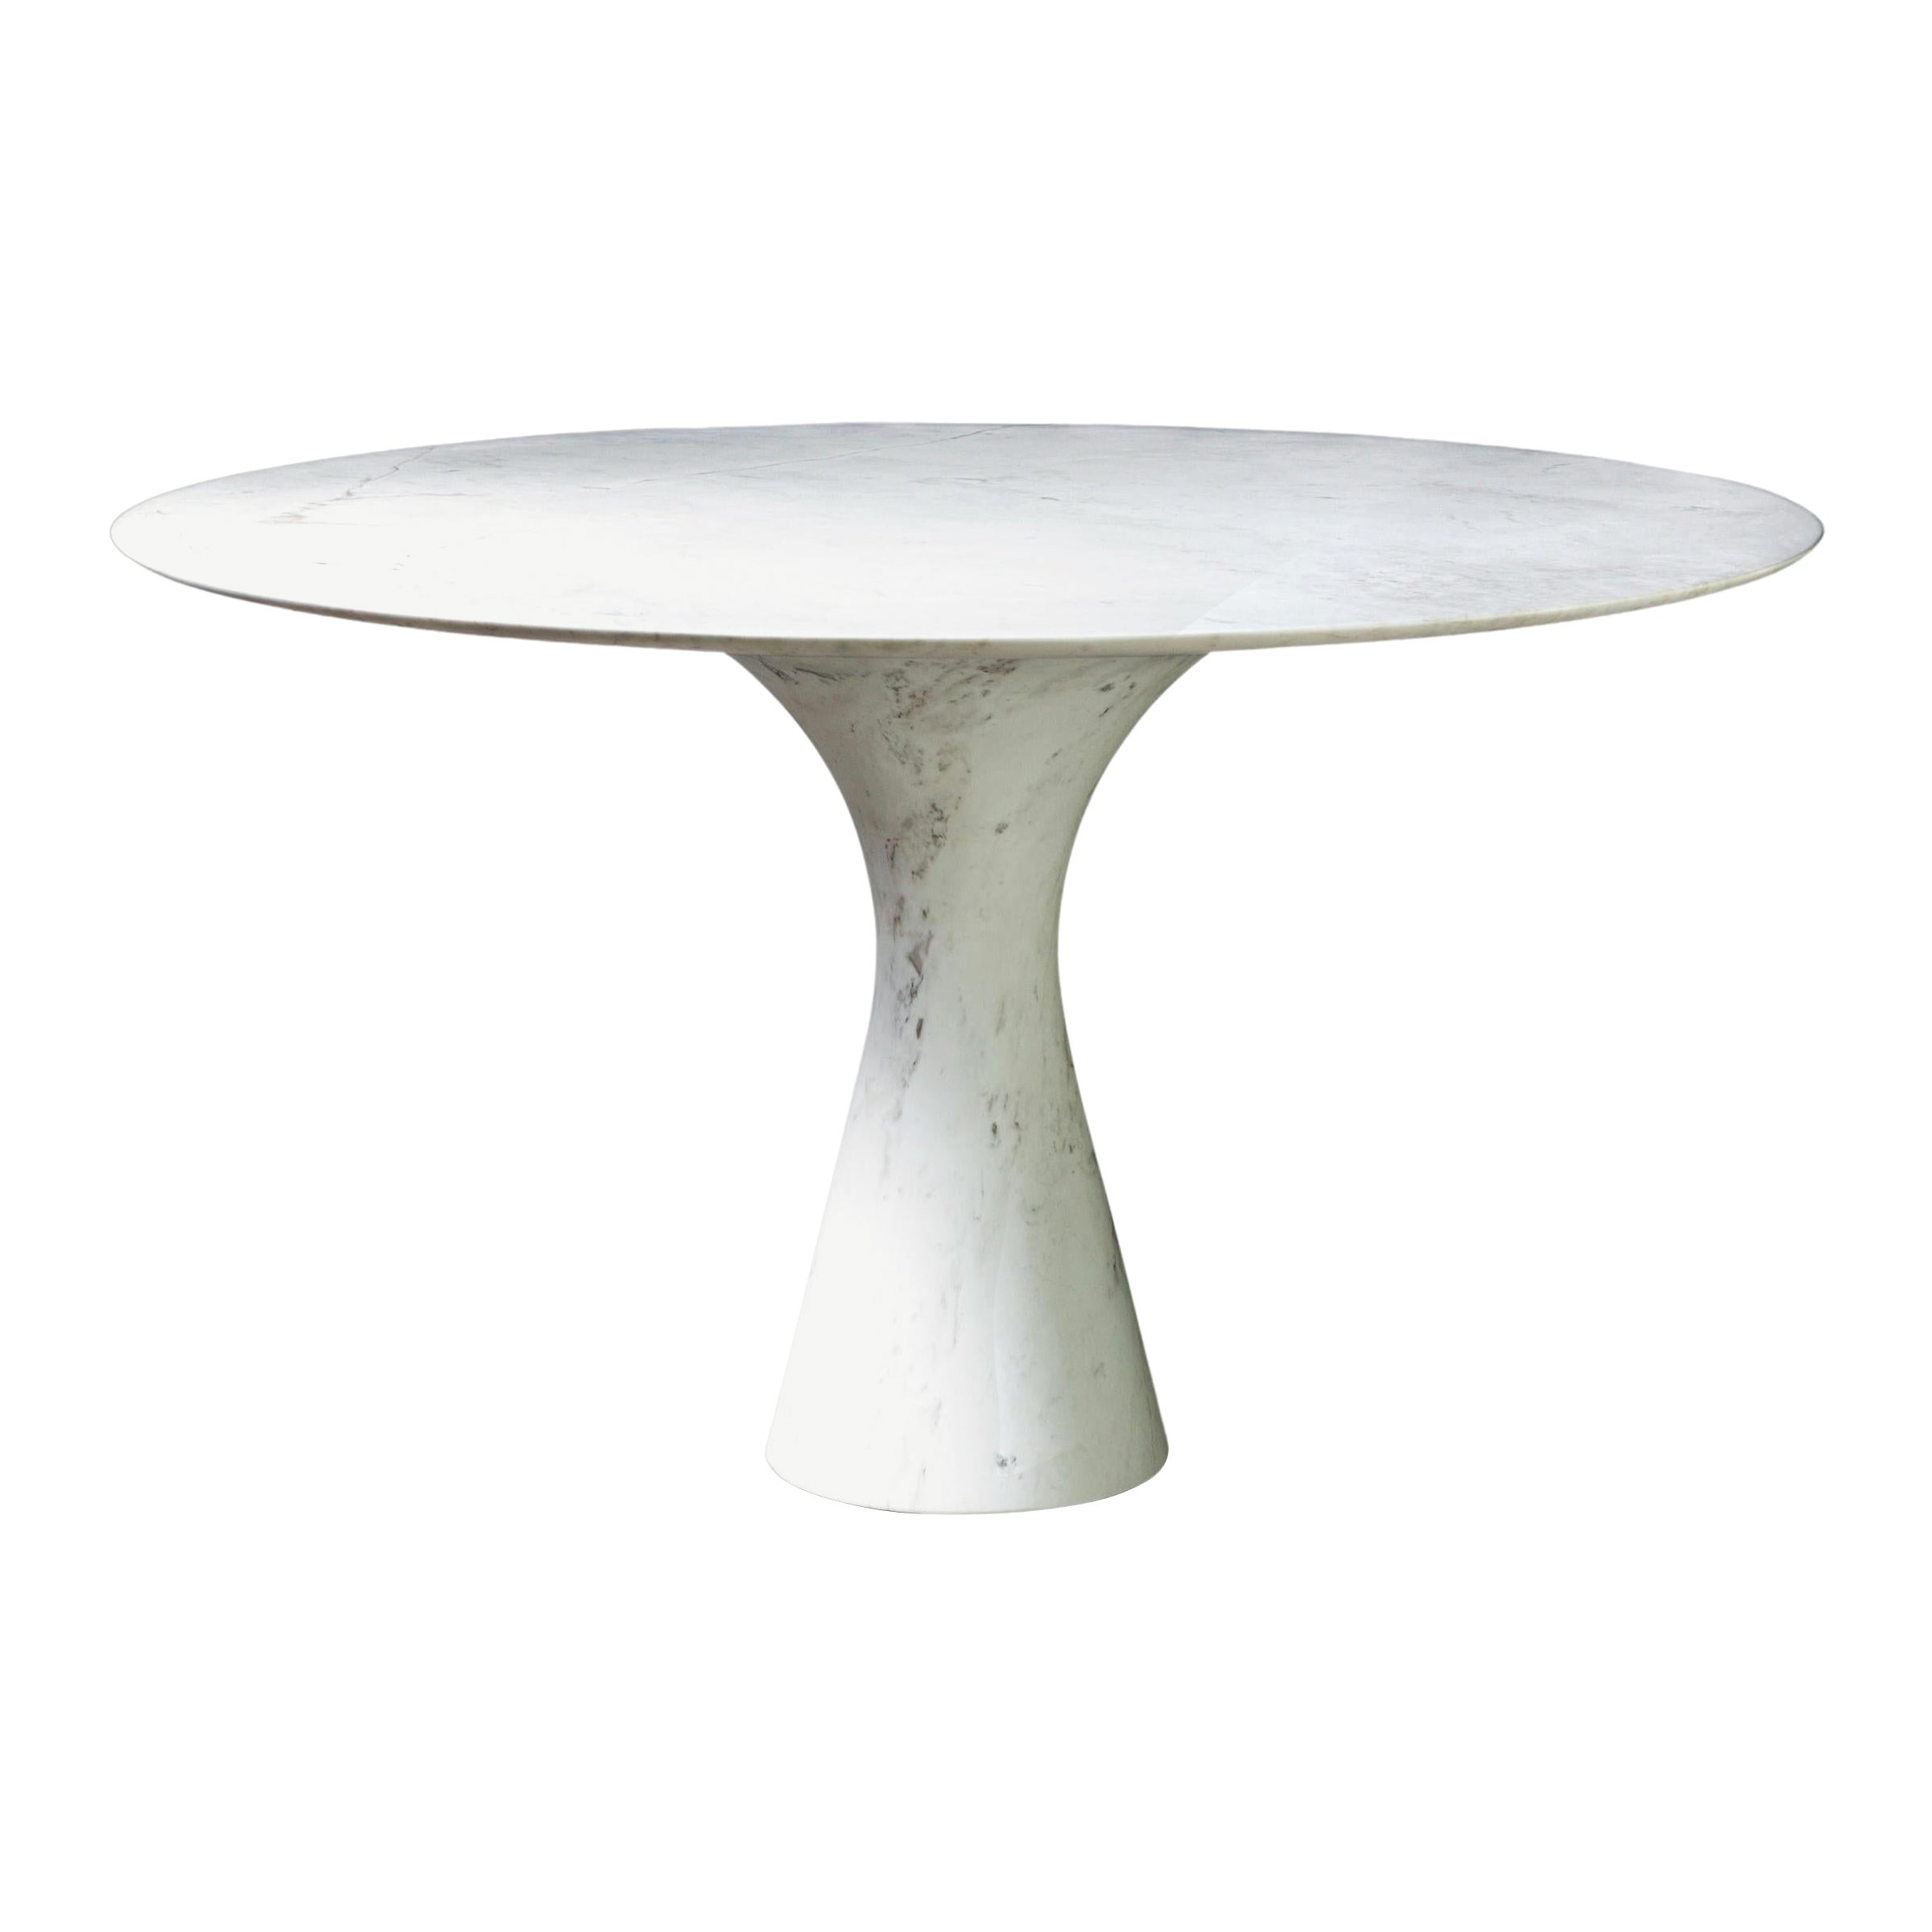 Kynos Refined Contemporary Marble Dining Table 160/75 For Sale